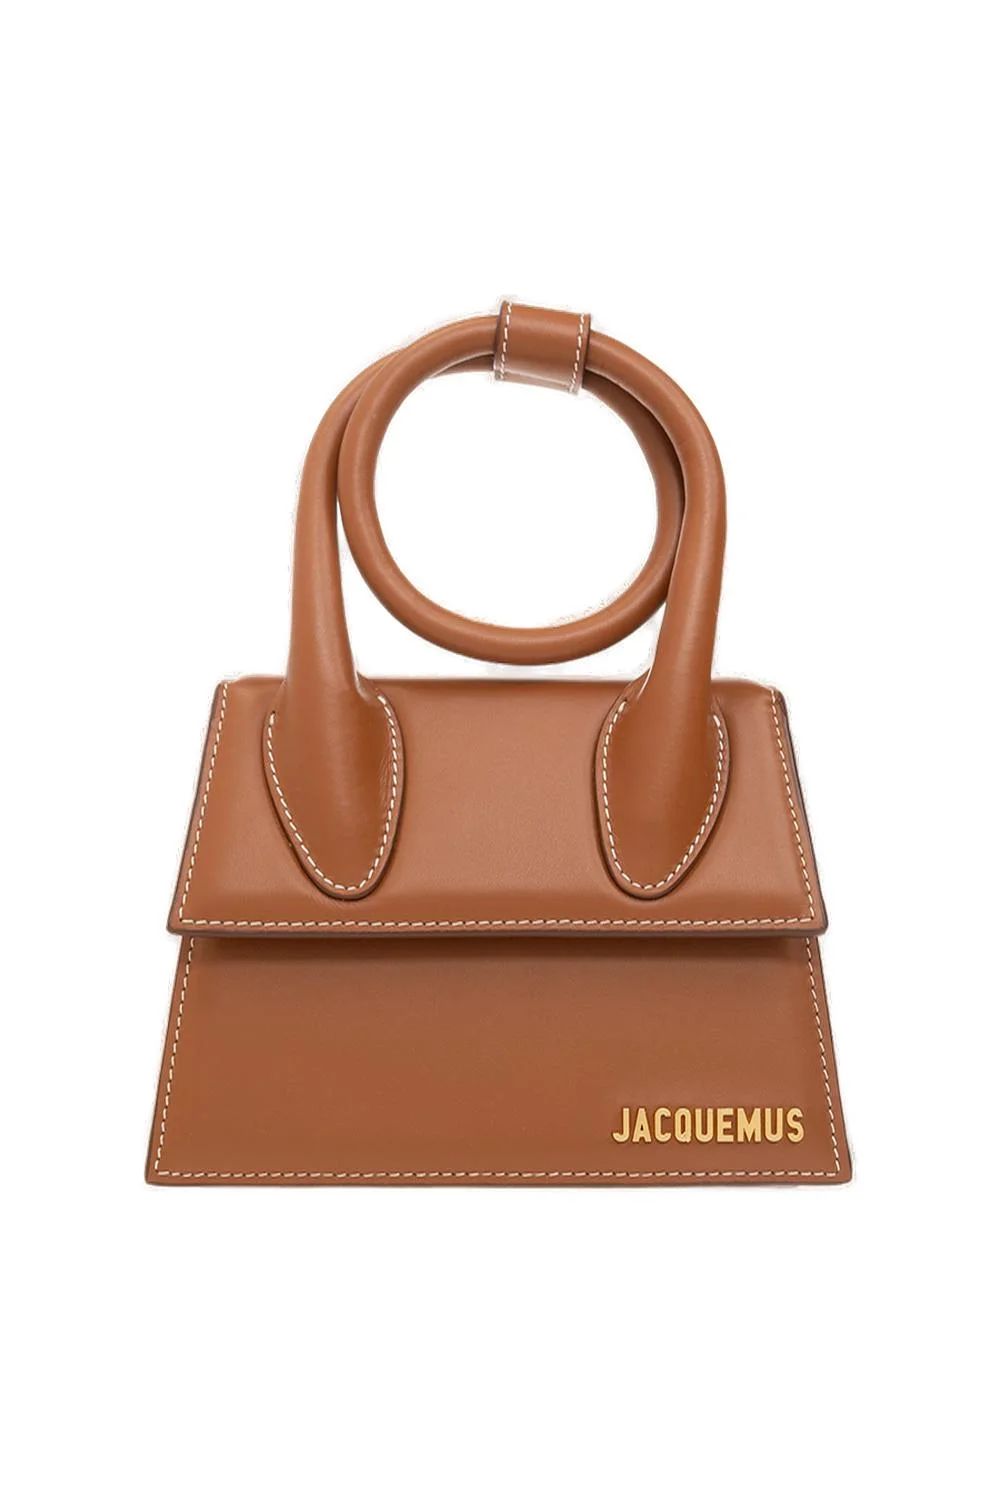 Jacquemus Le Chiquito Neud Top Handle Tote Bag | Cettire Global